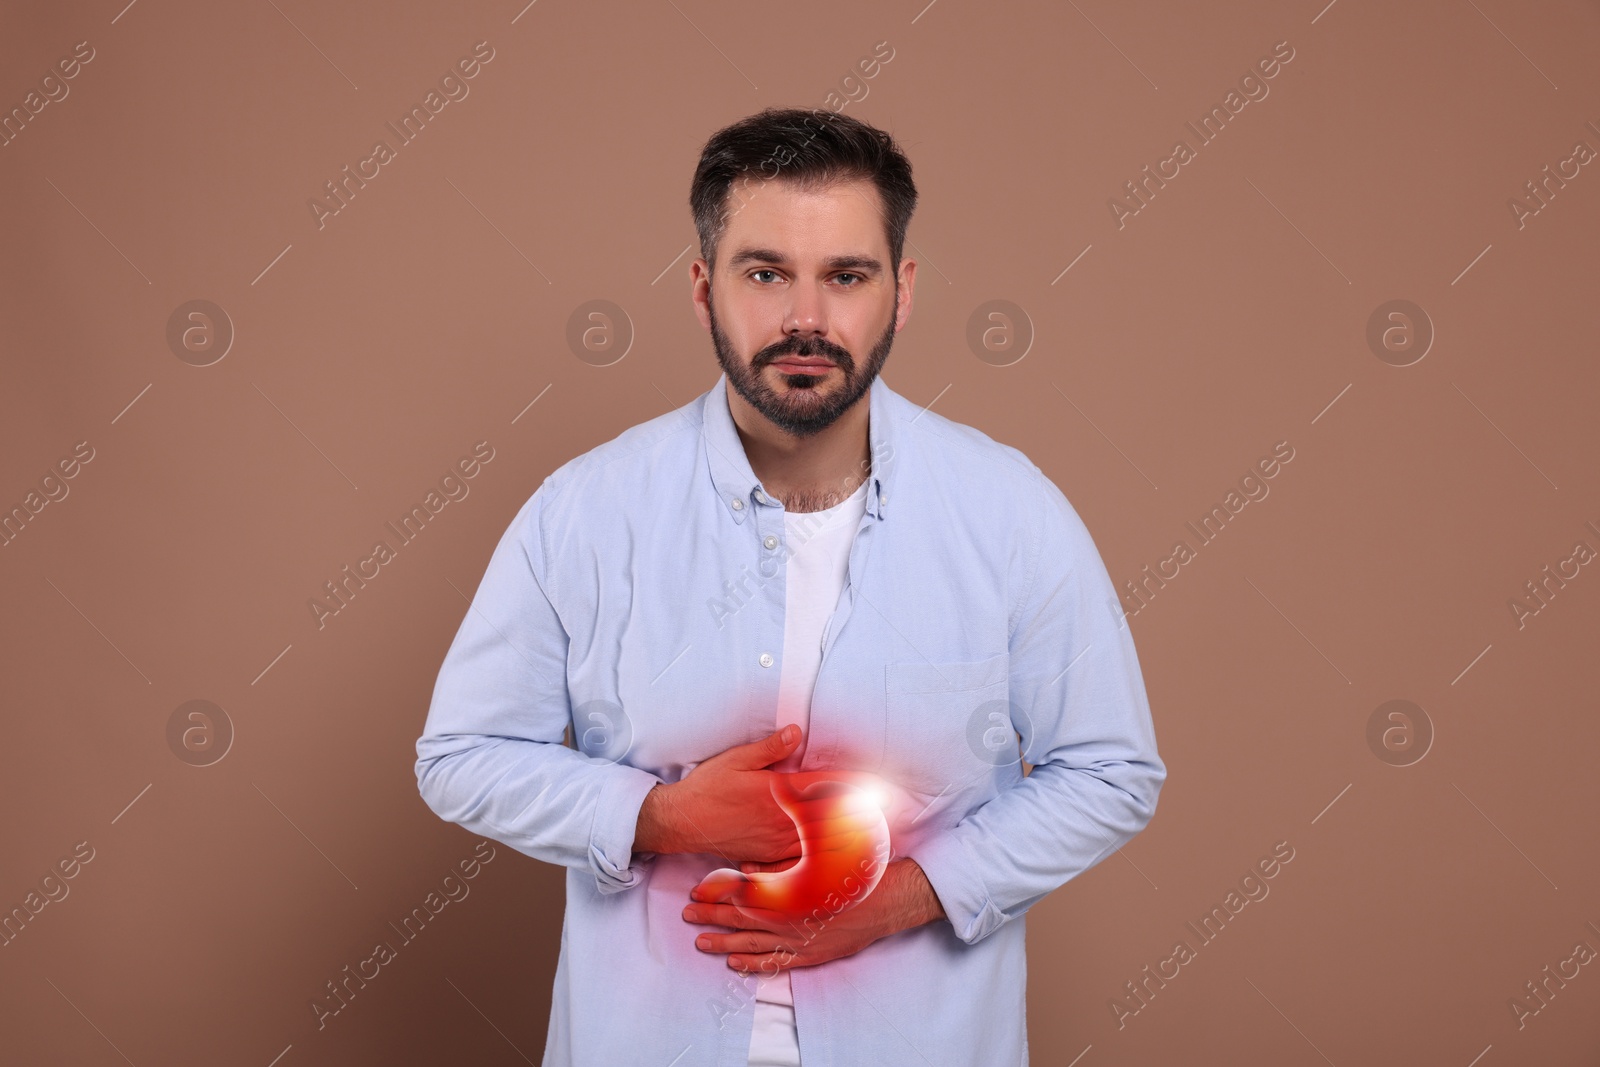 Image of Man suffering from abdominal pain on brown background. Illustration of unhealthy stomach